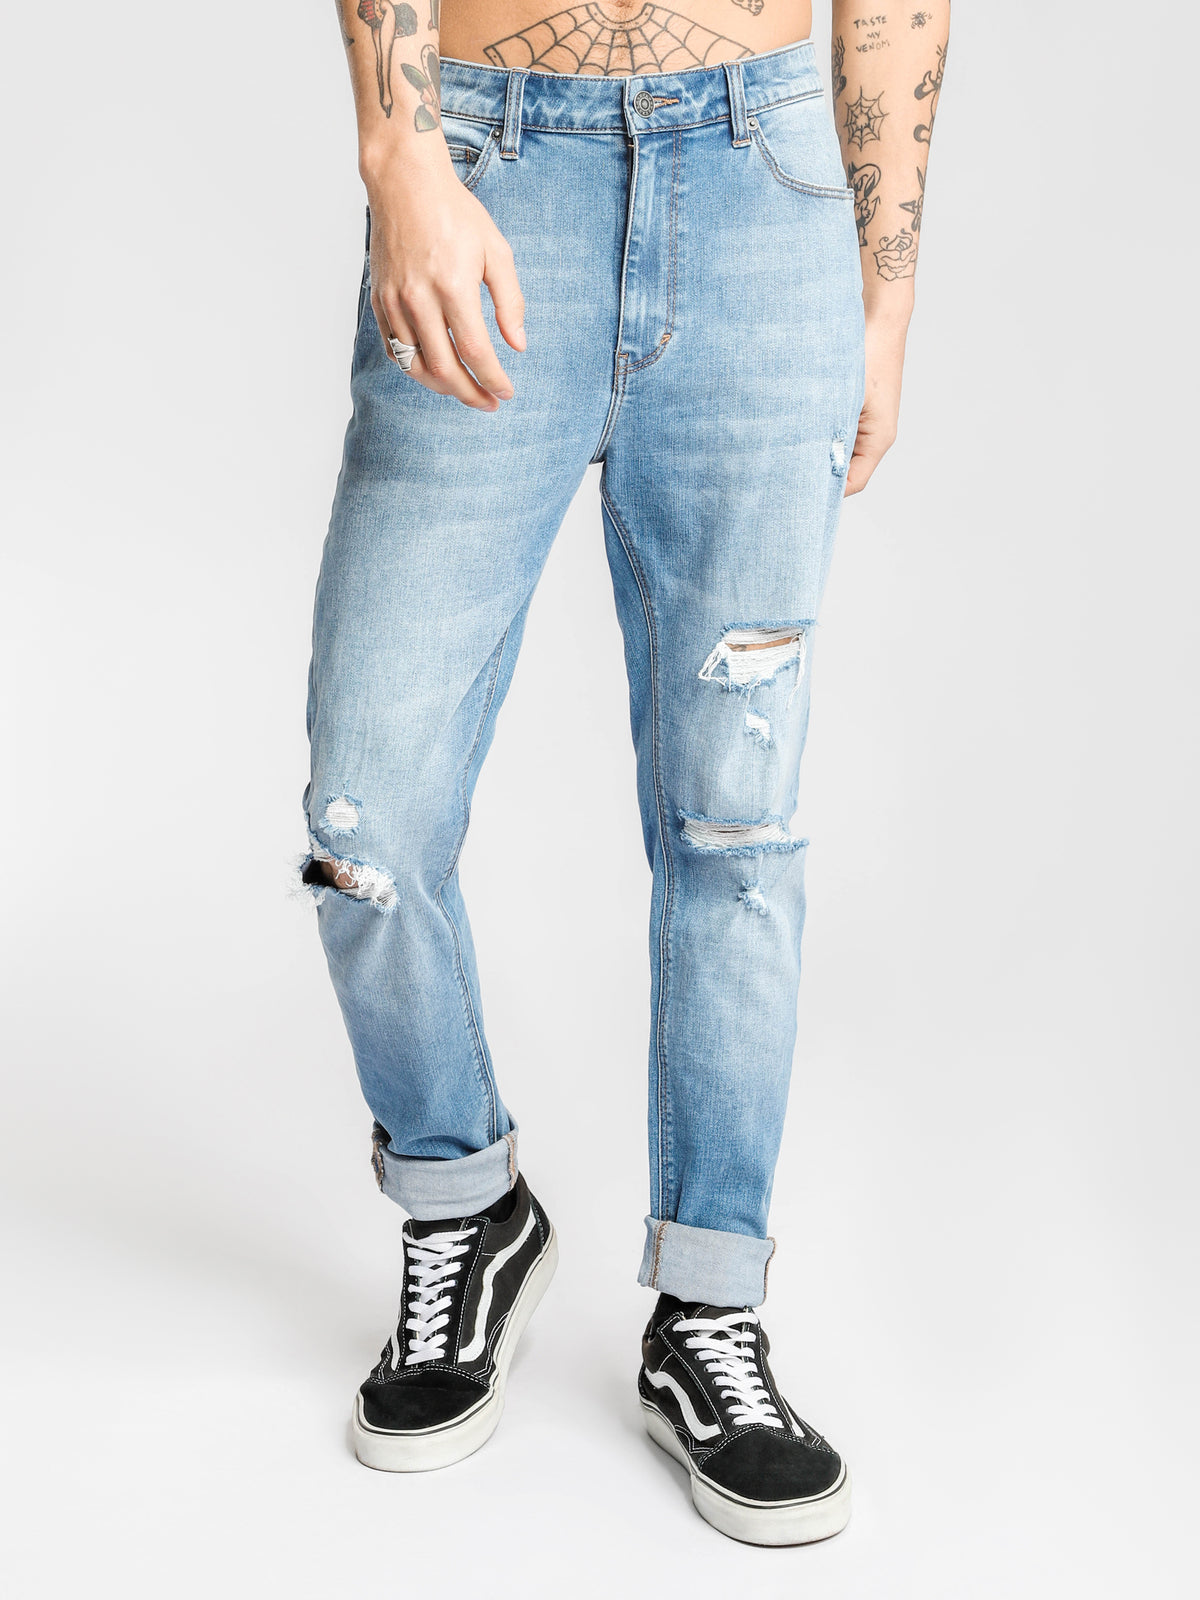 A Dropped Skinny Turn Up Jeans in Chalk Indigo